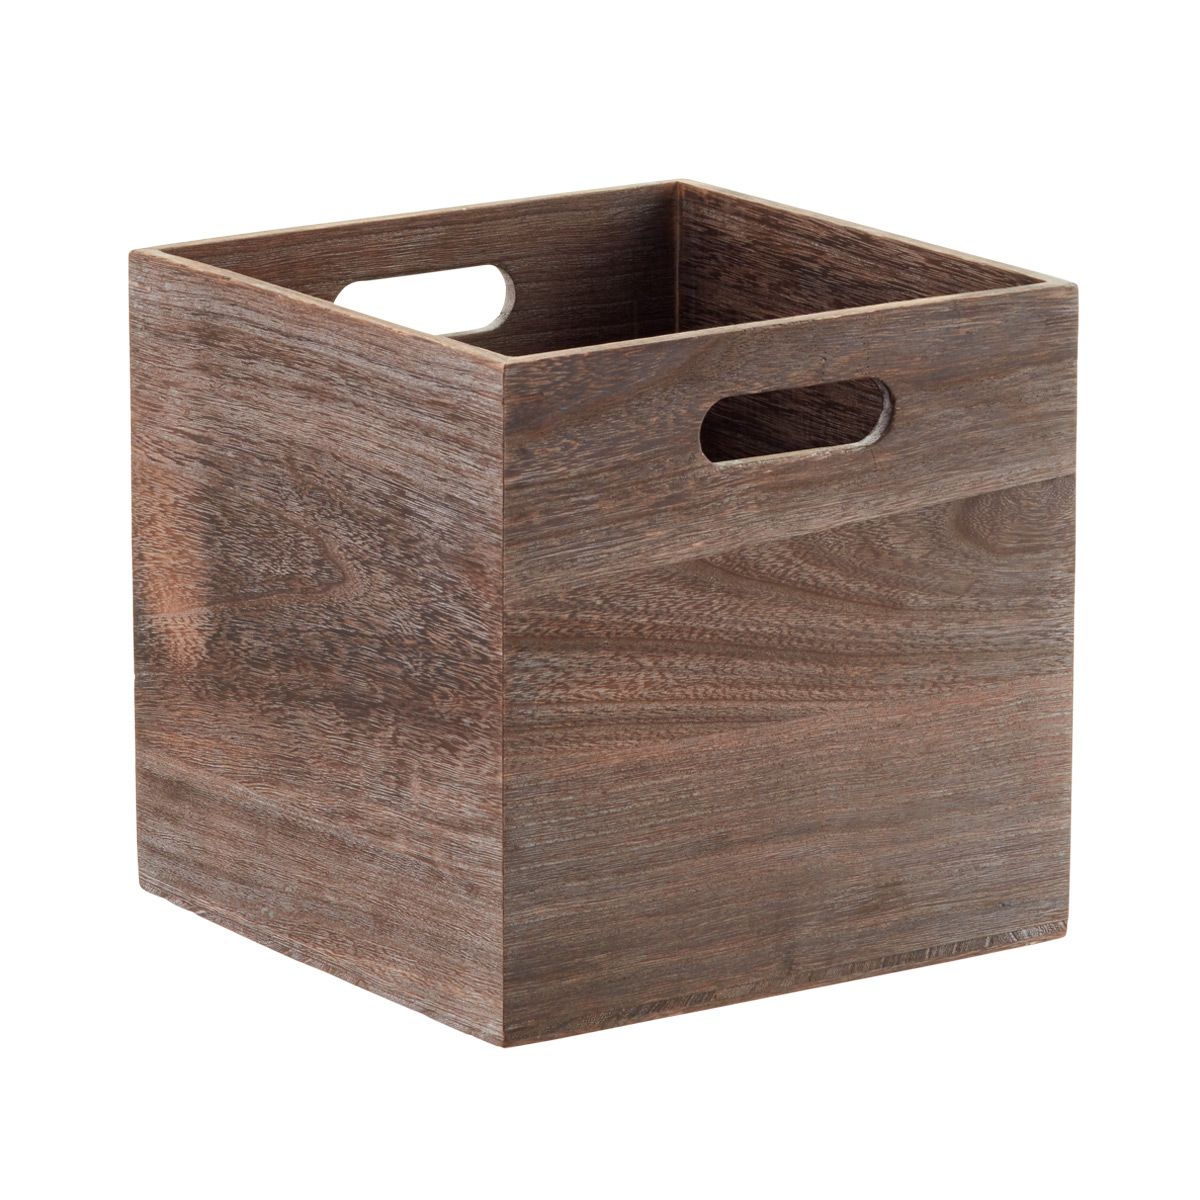 Wooden Storage Cube | The Container Store